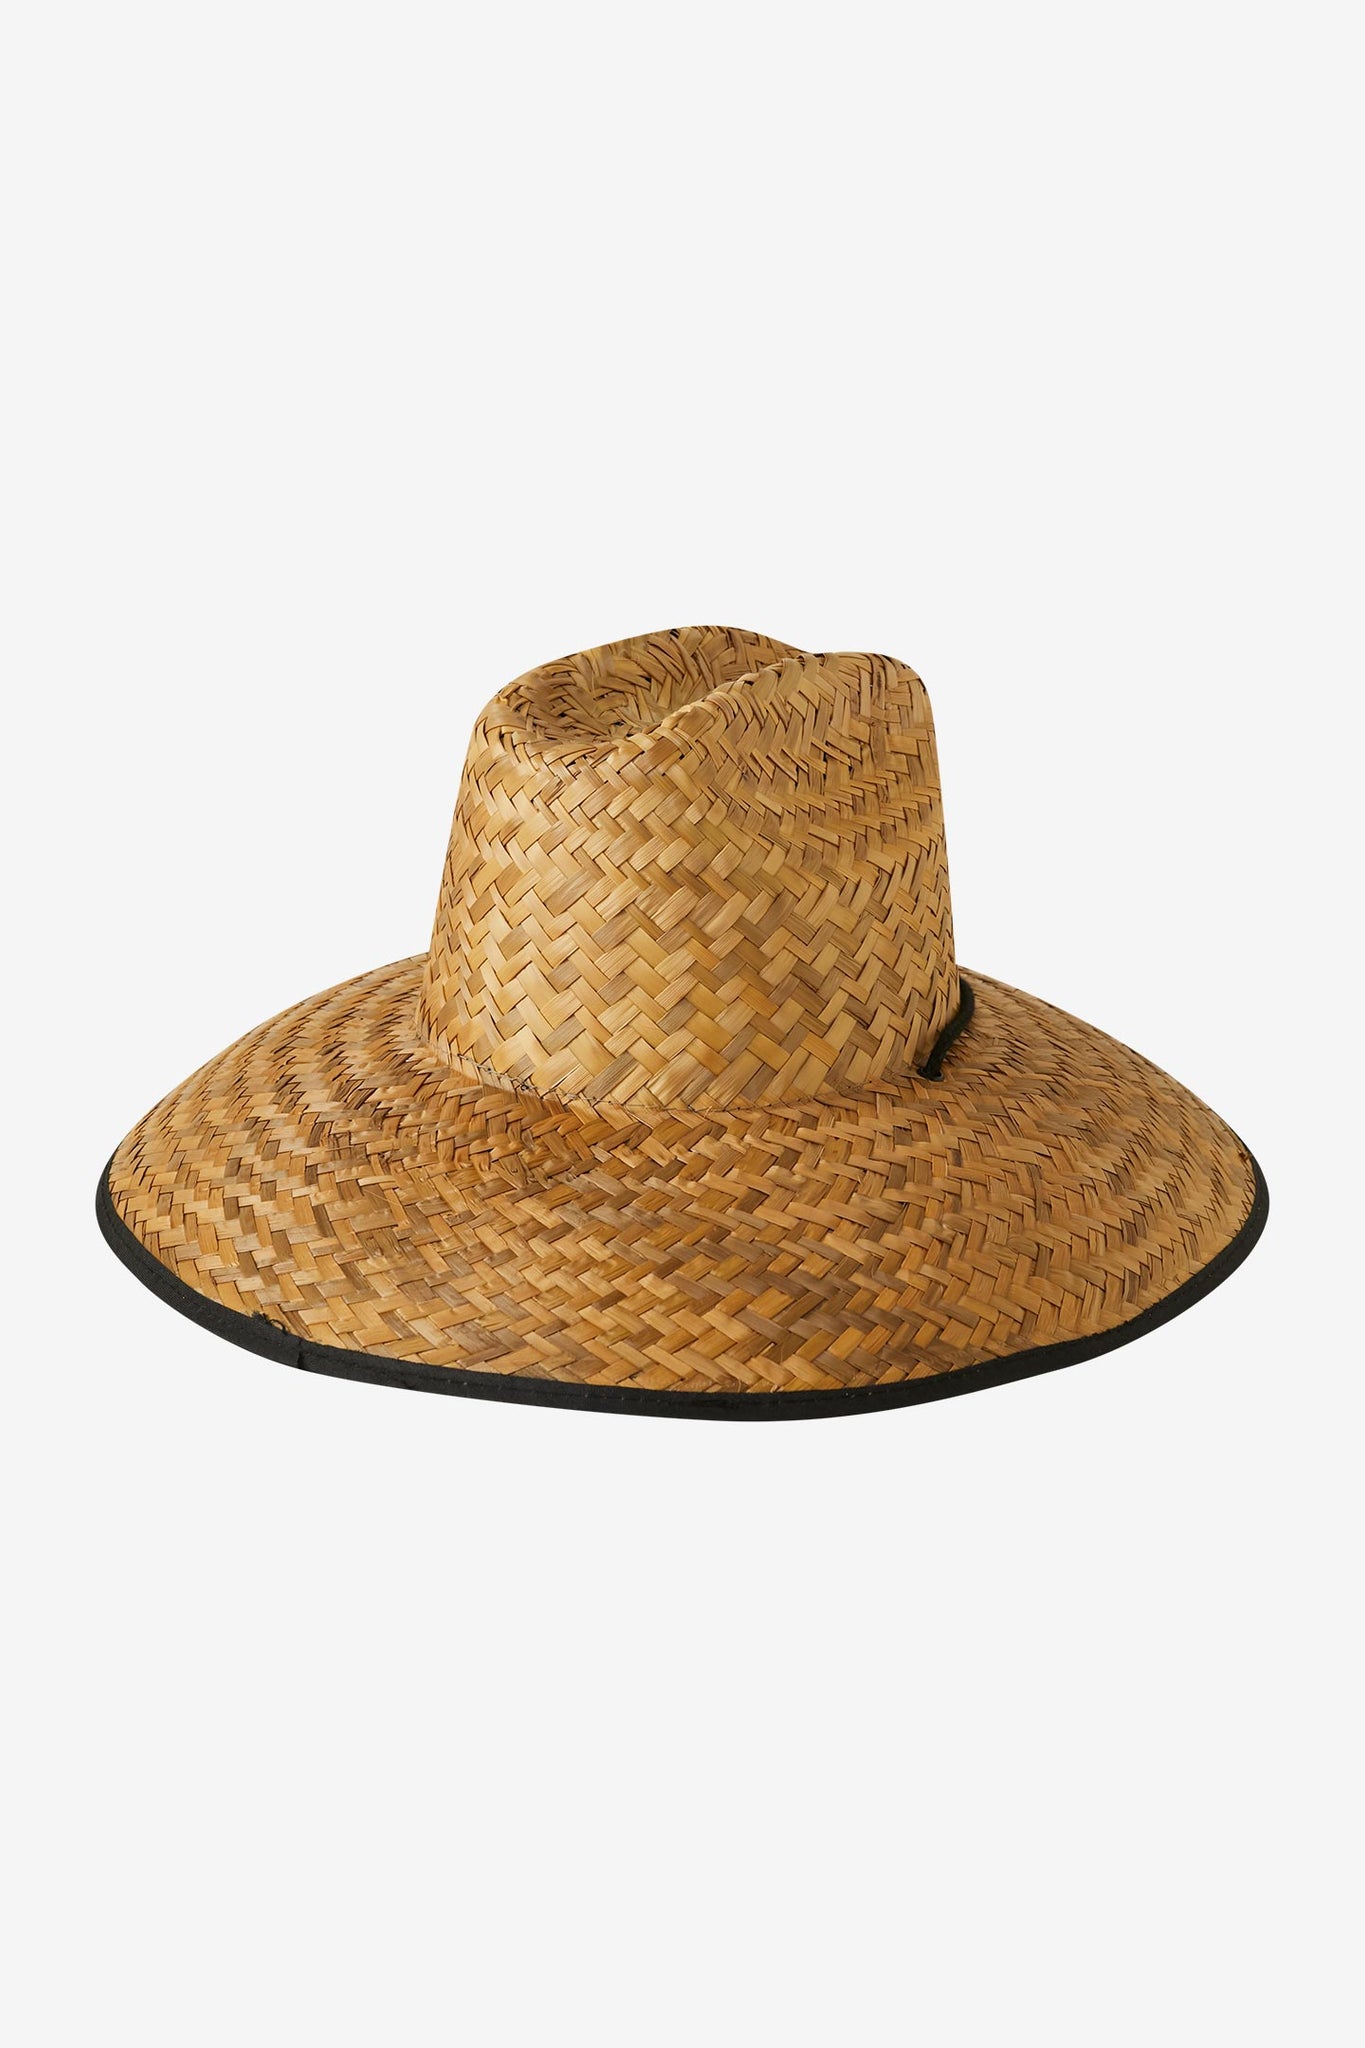 O'Neill Sonoma Hat for Men - Natural / S/M